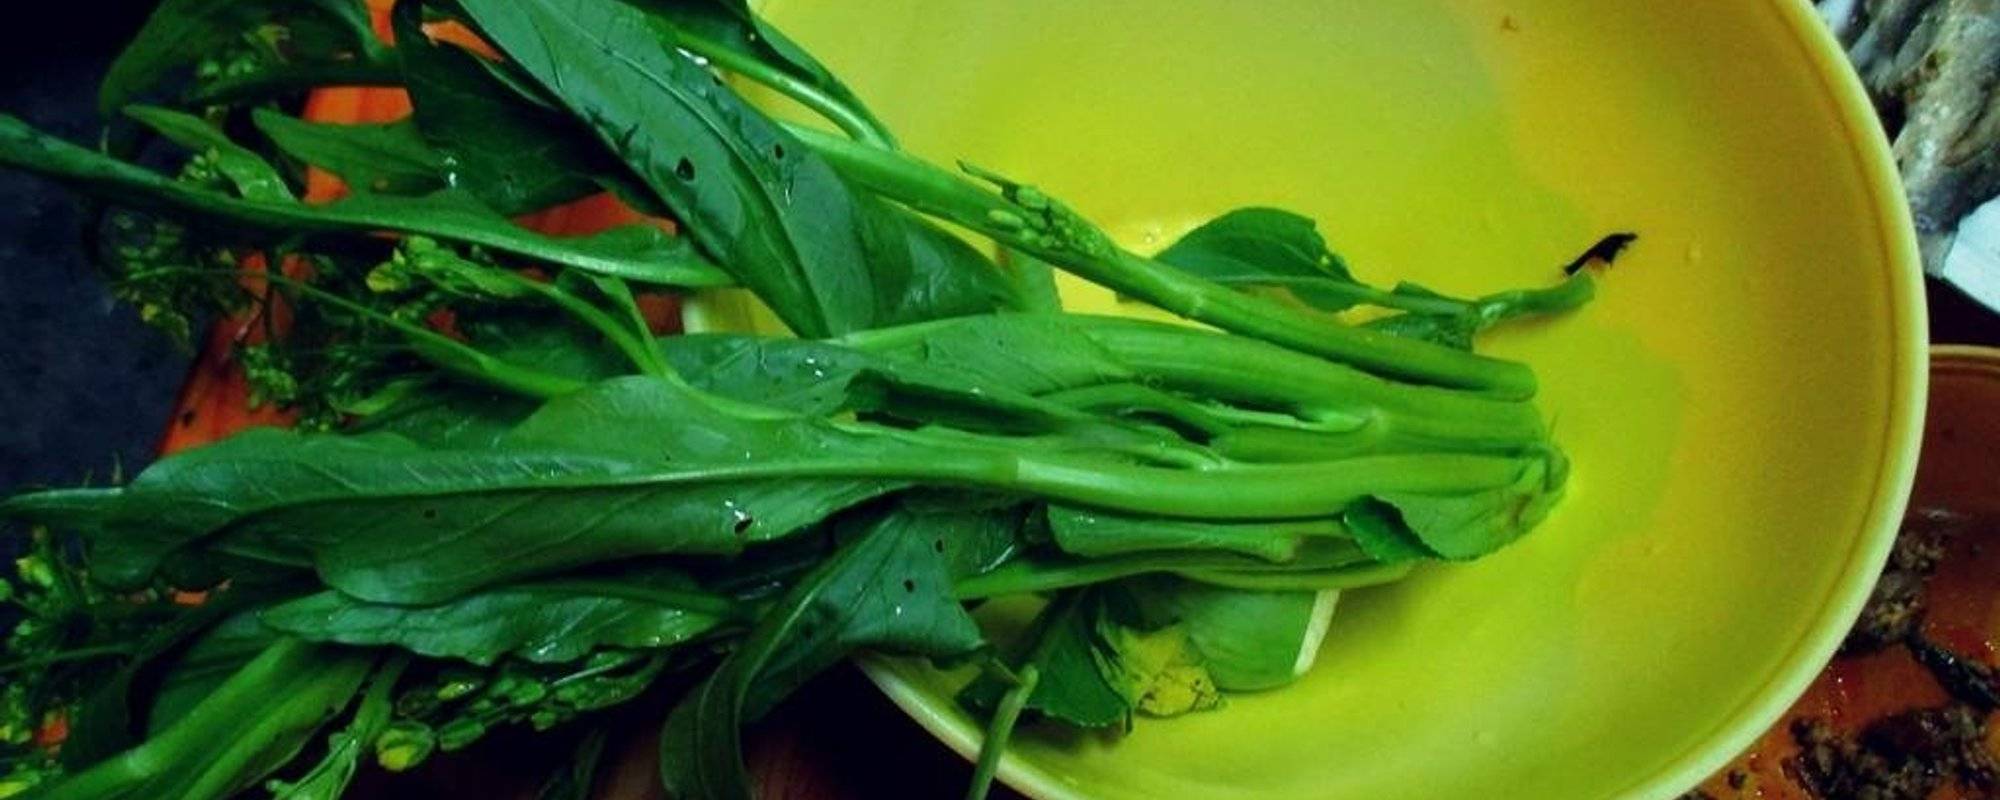 How to Eat Greens - Examples from SE Asia